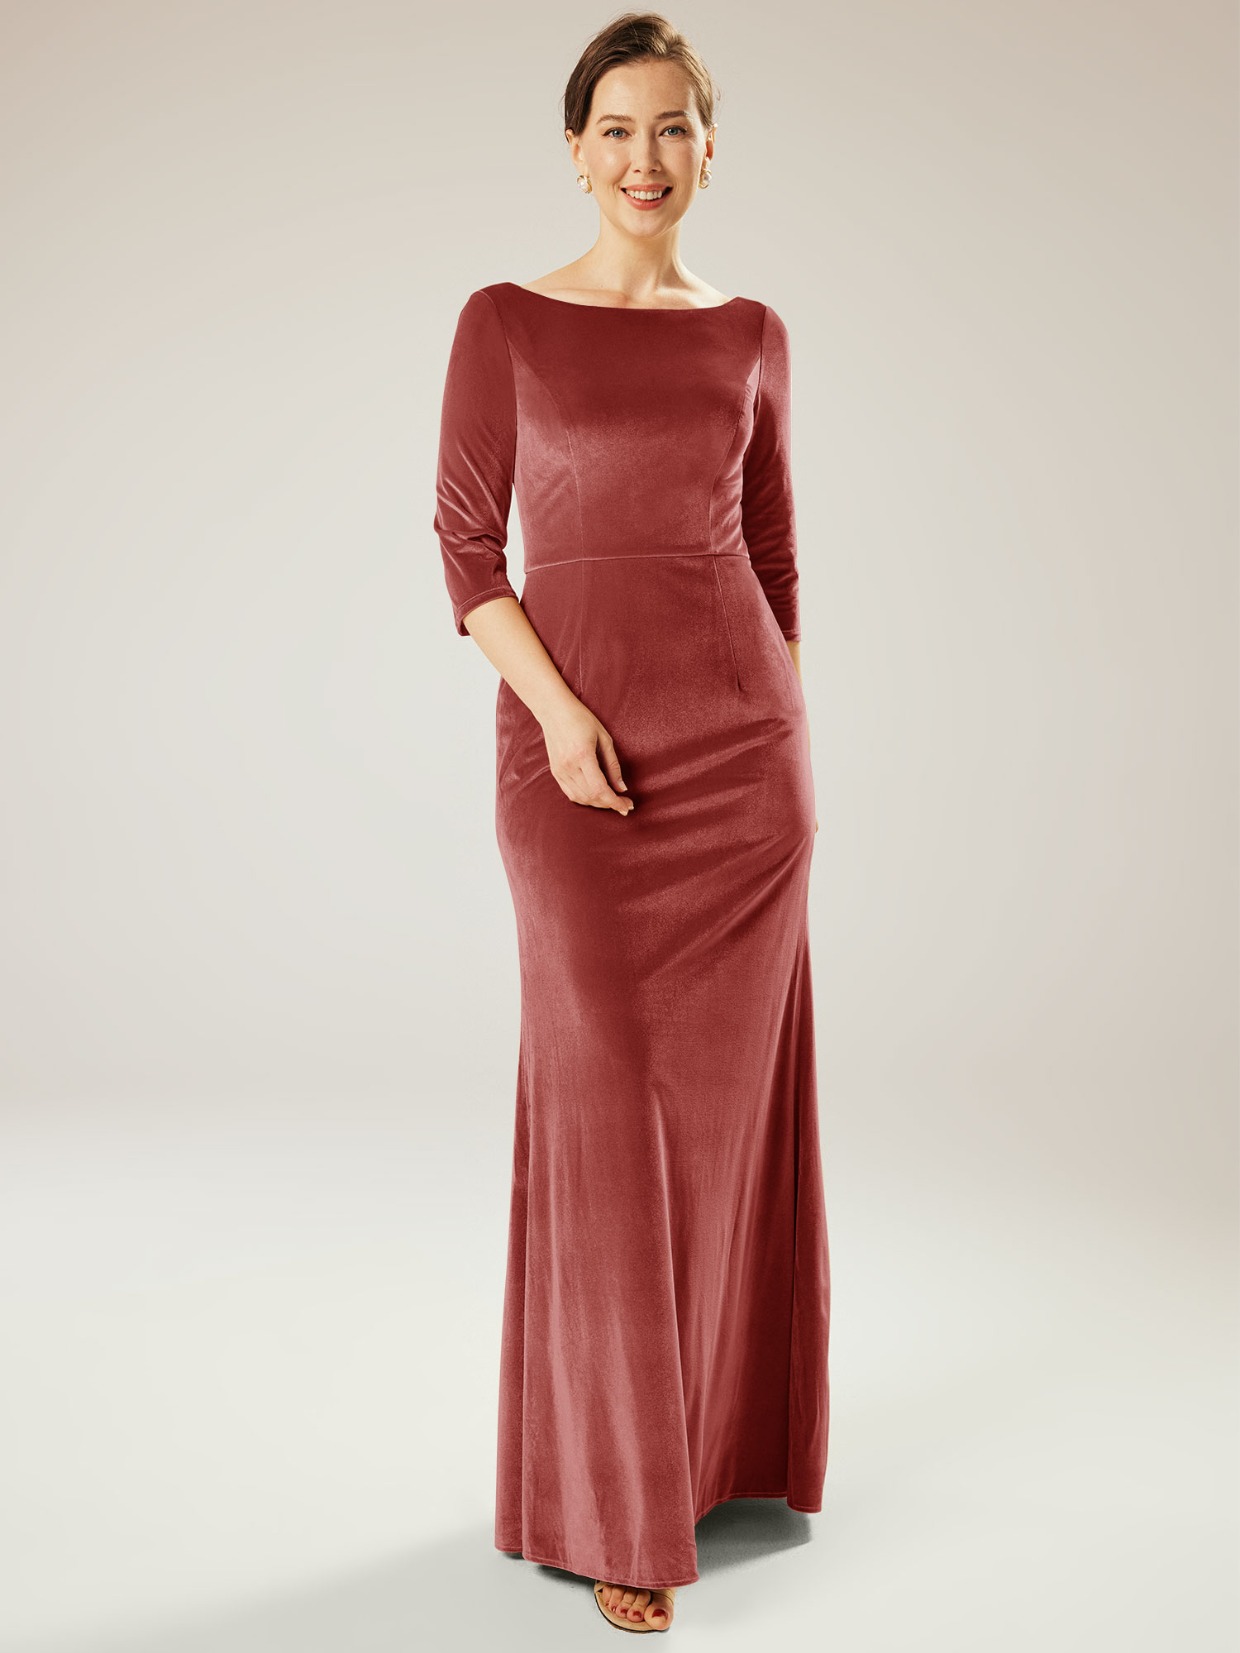 dusty rose velvet mother of the bride dress with 3/4 length sleeves